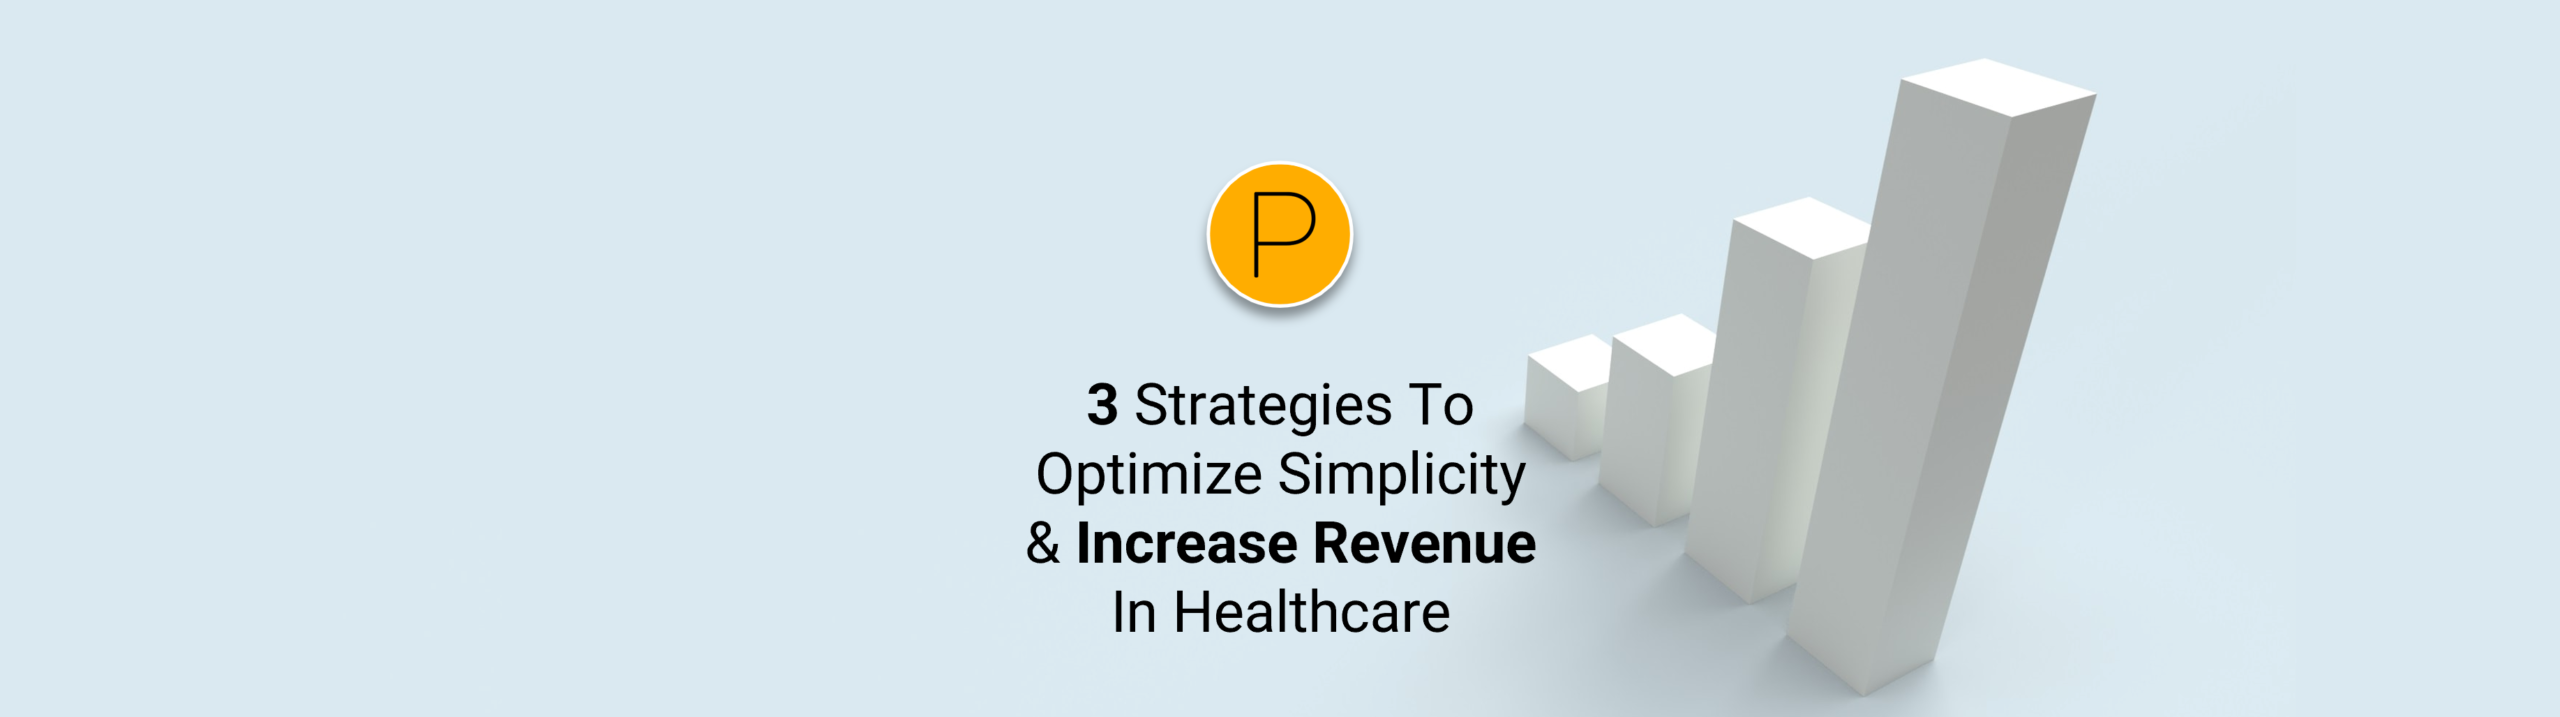 3 Strategies To Optimize Simplicity and Increase Revenue In Healthcare